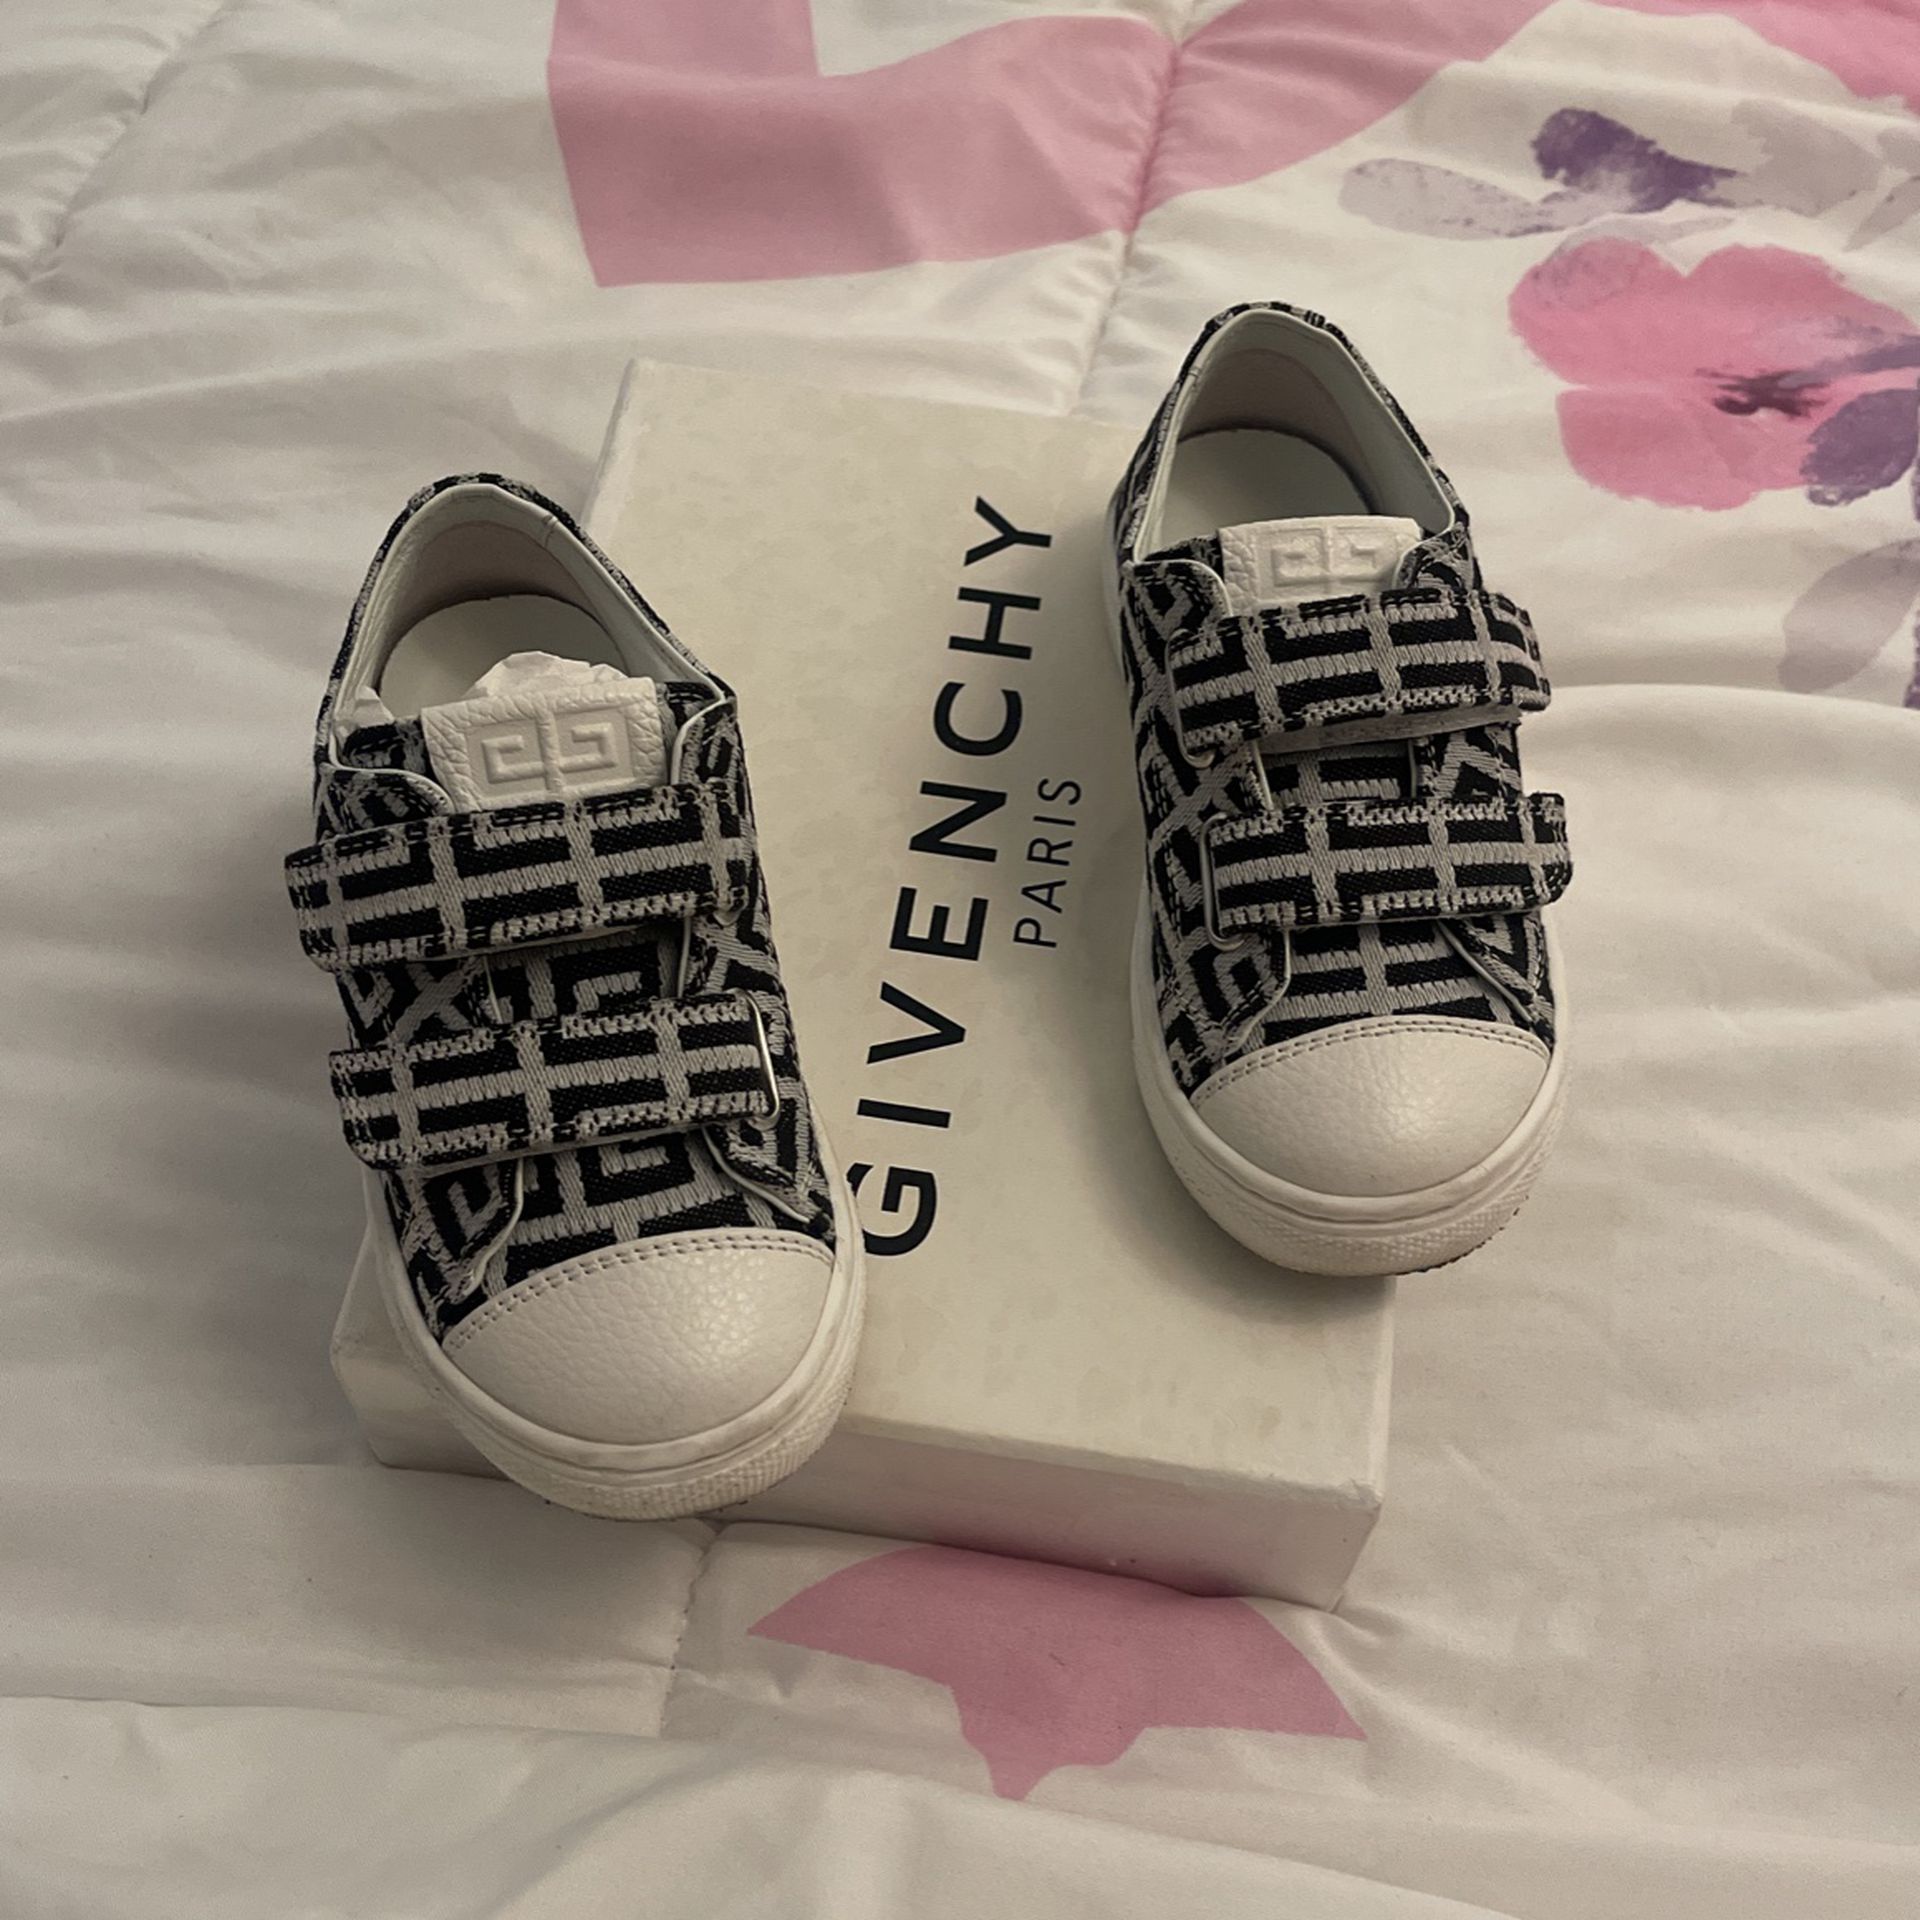 Solskoldning Hurtig rulletrappe Givenchy Sneakers for Sale in Chattanooga, TN - OfferUp